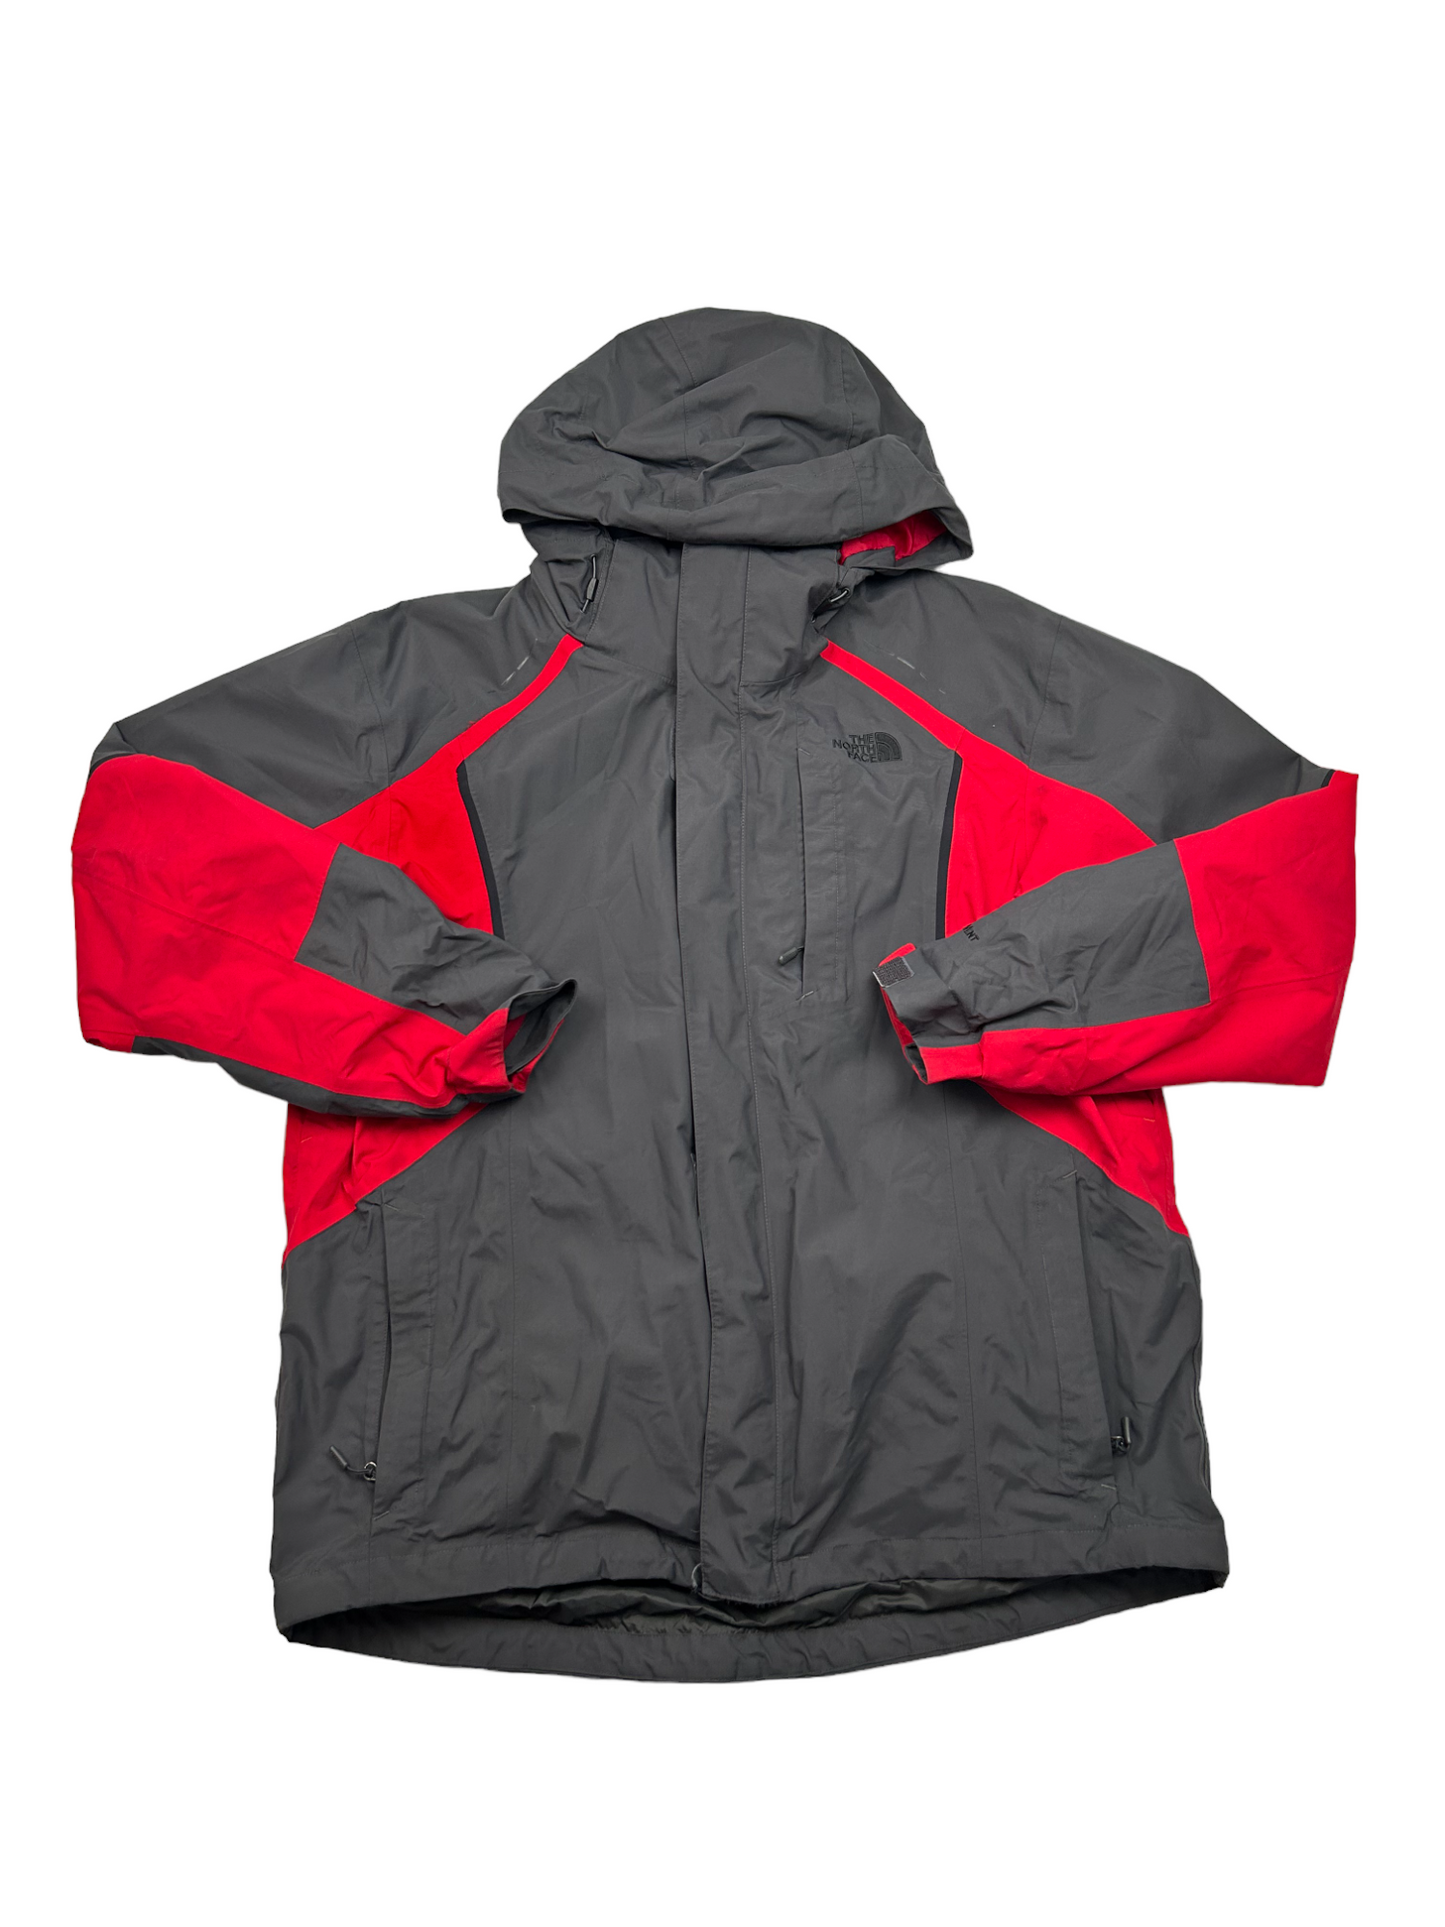 The North Face Grey & Red Jacket